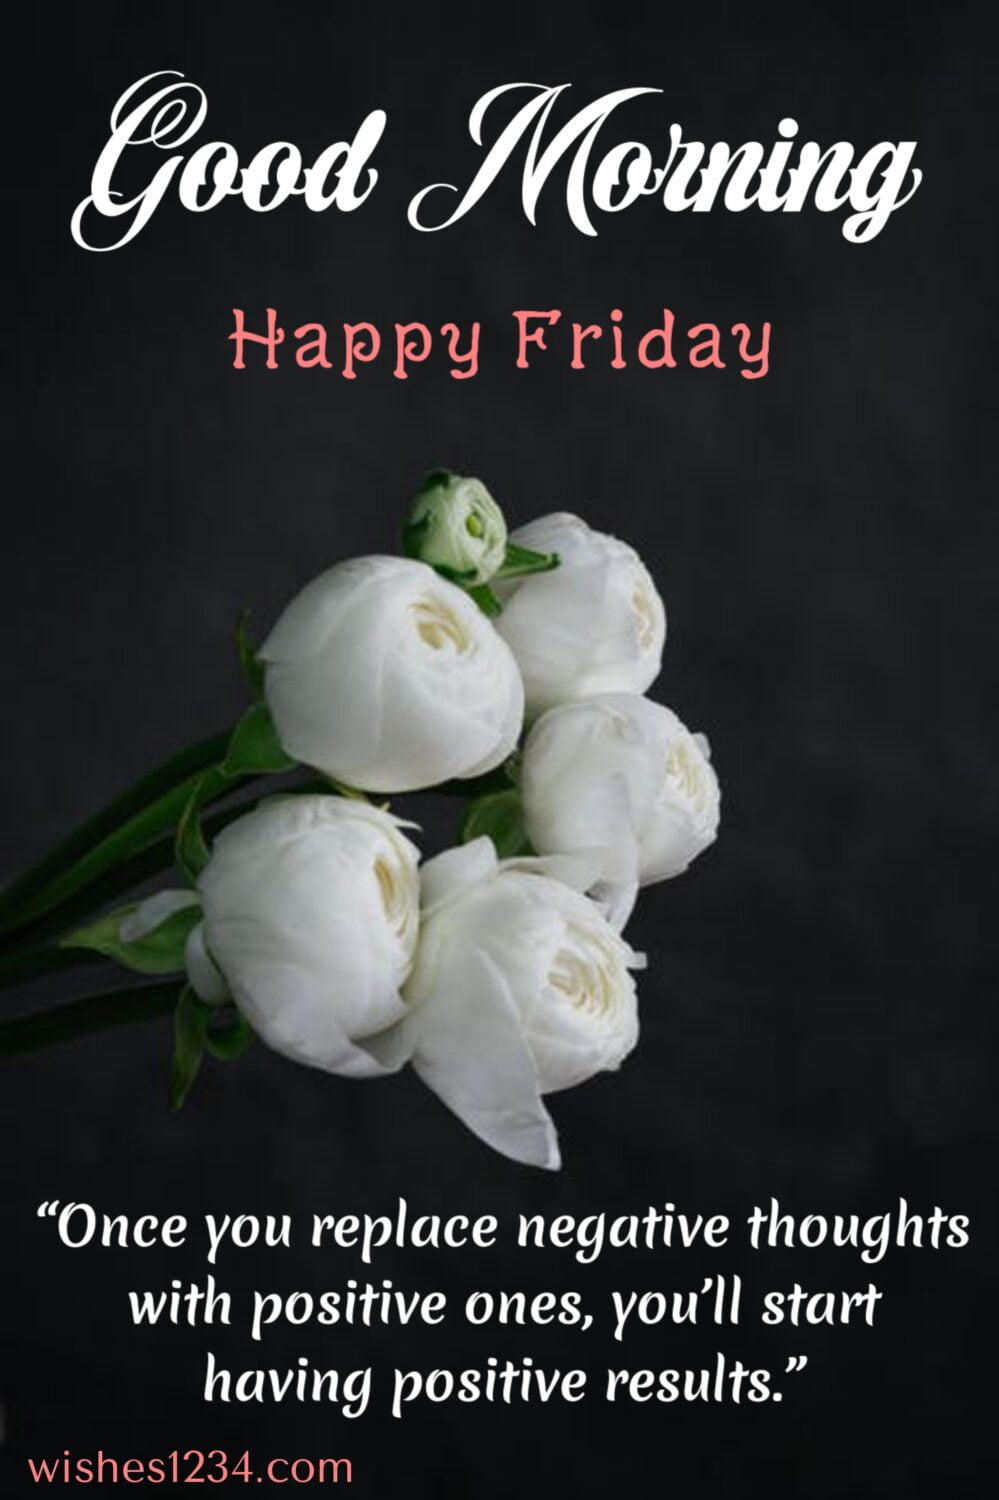 Bunch of white roses, Quotes about Friday | Friday blessings.